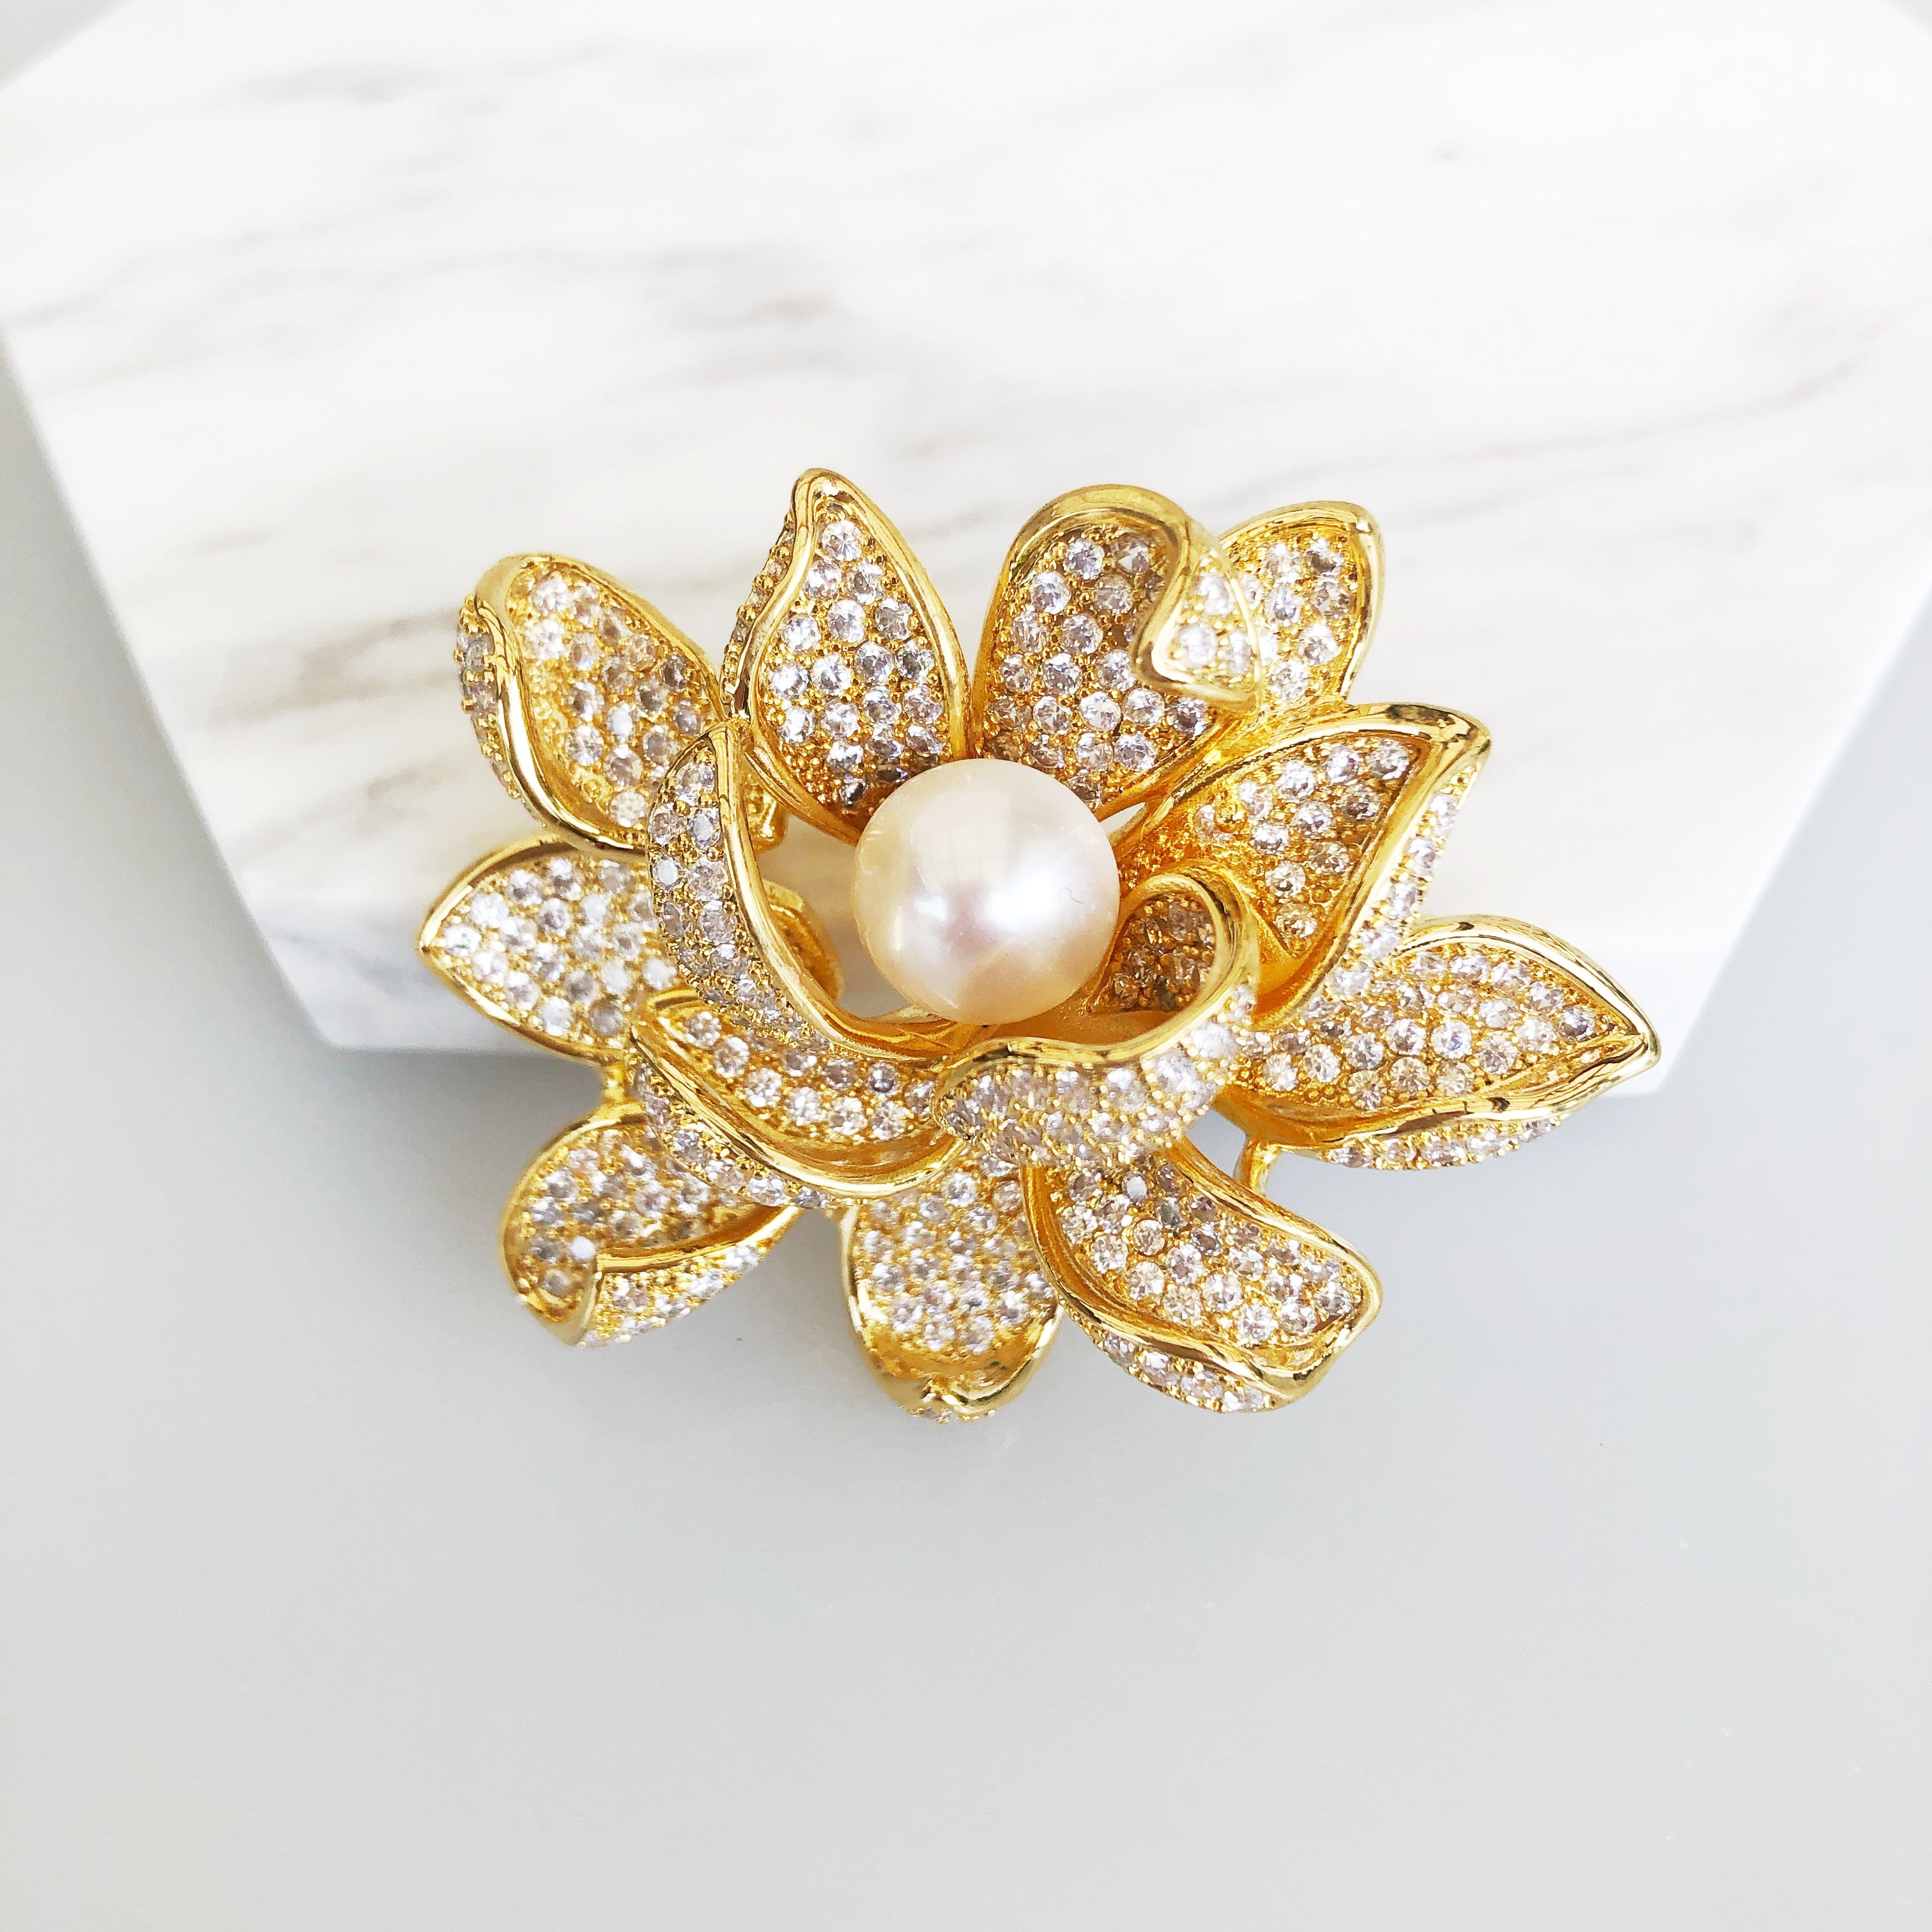 Tiowios 2022 Real Gold Electroplated Pearl Zircon Wheat Ear Brooch High-end  Pin Versatile Clothing Party Jewelry Gift For Women - Brooches - AliExpress